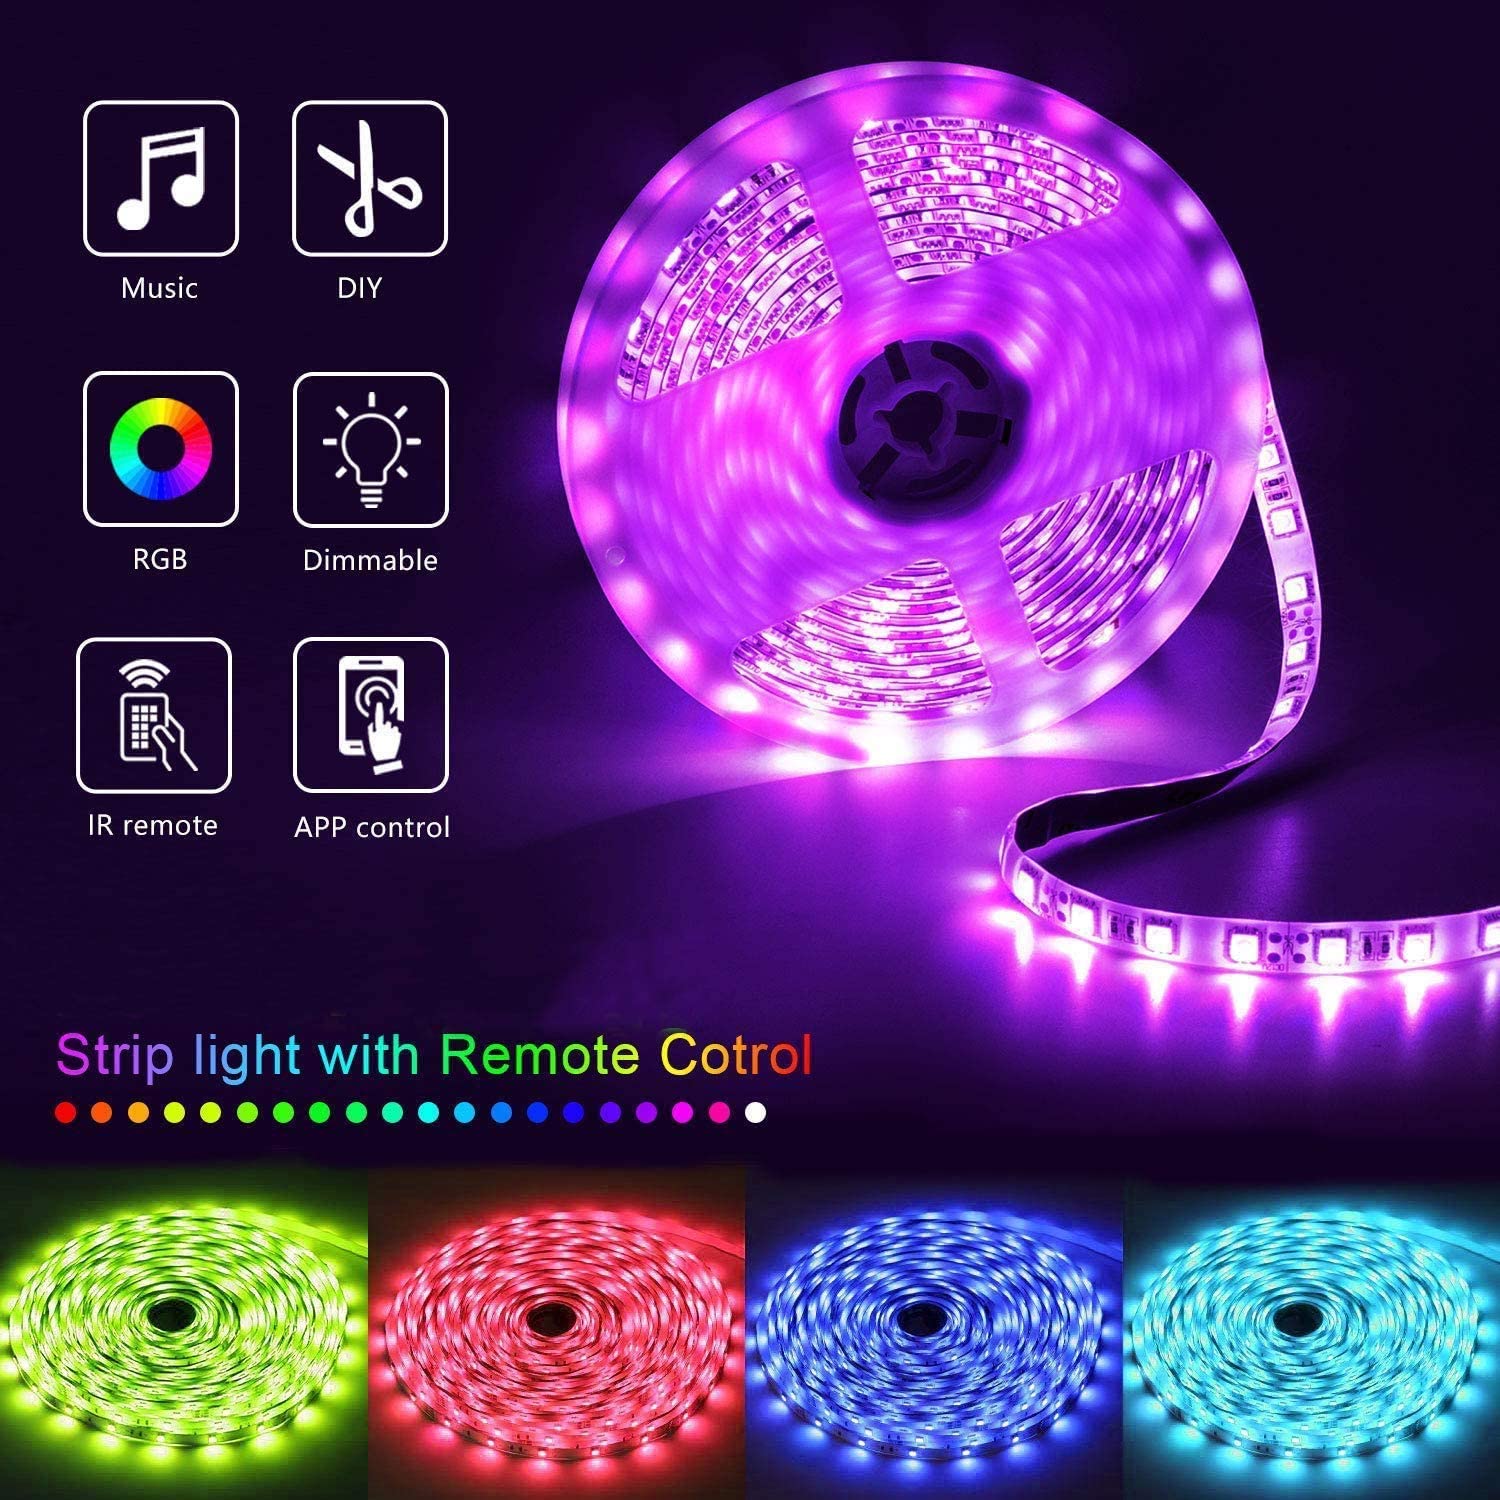 FREE SHIPPING:: Purple Mist LED Lighted Portable Charger Compact